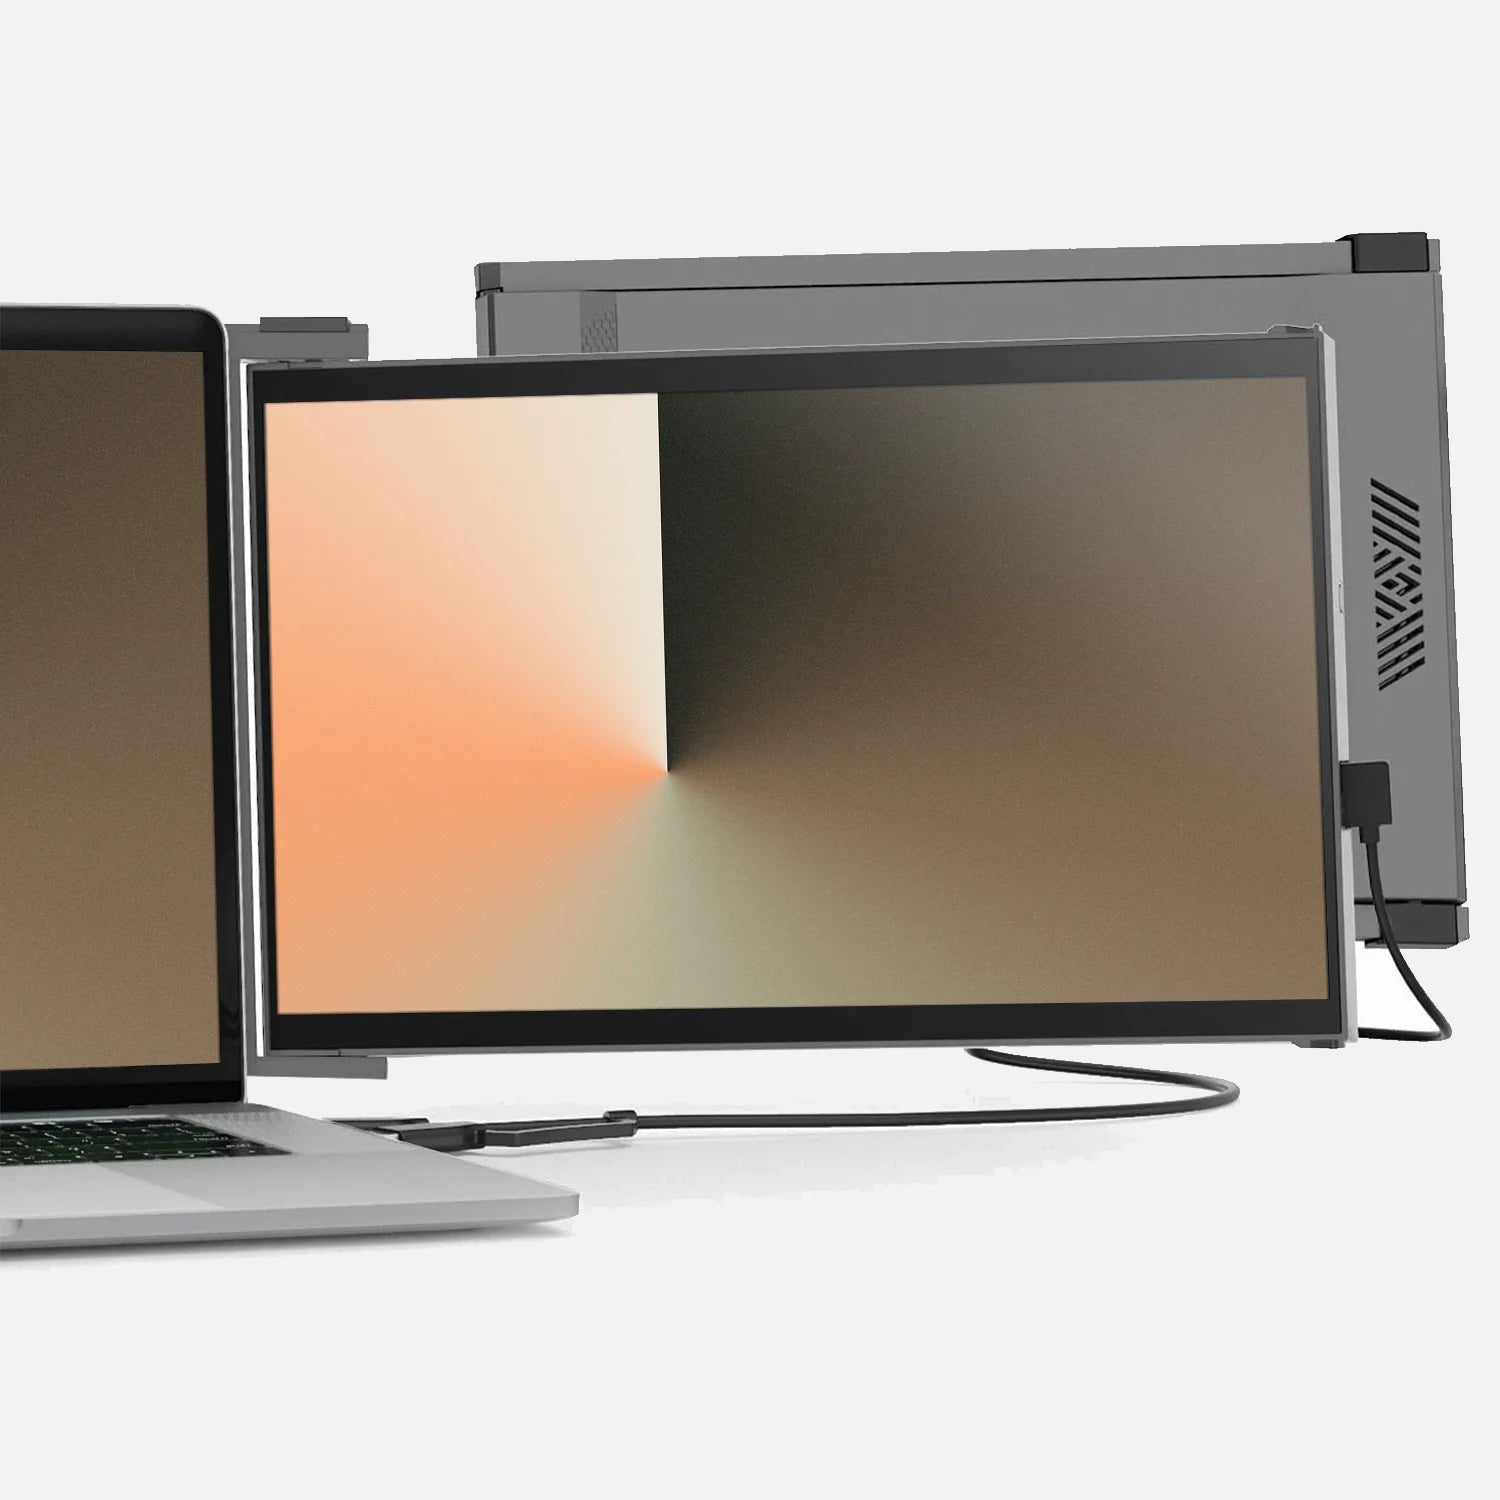 Grey Duex Max dual screen for laptop